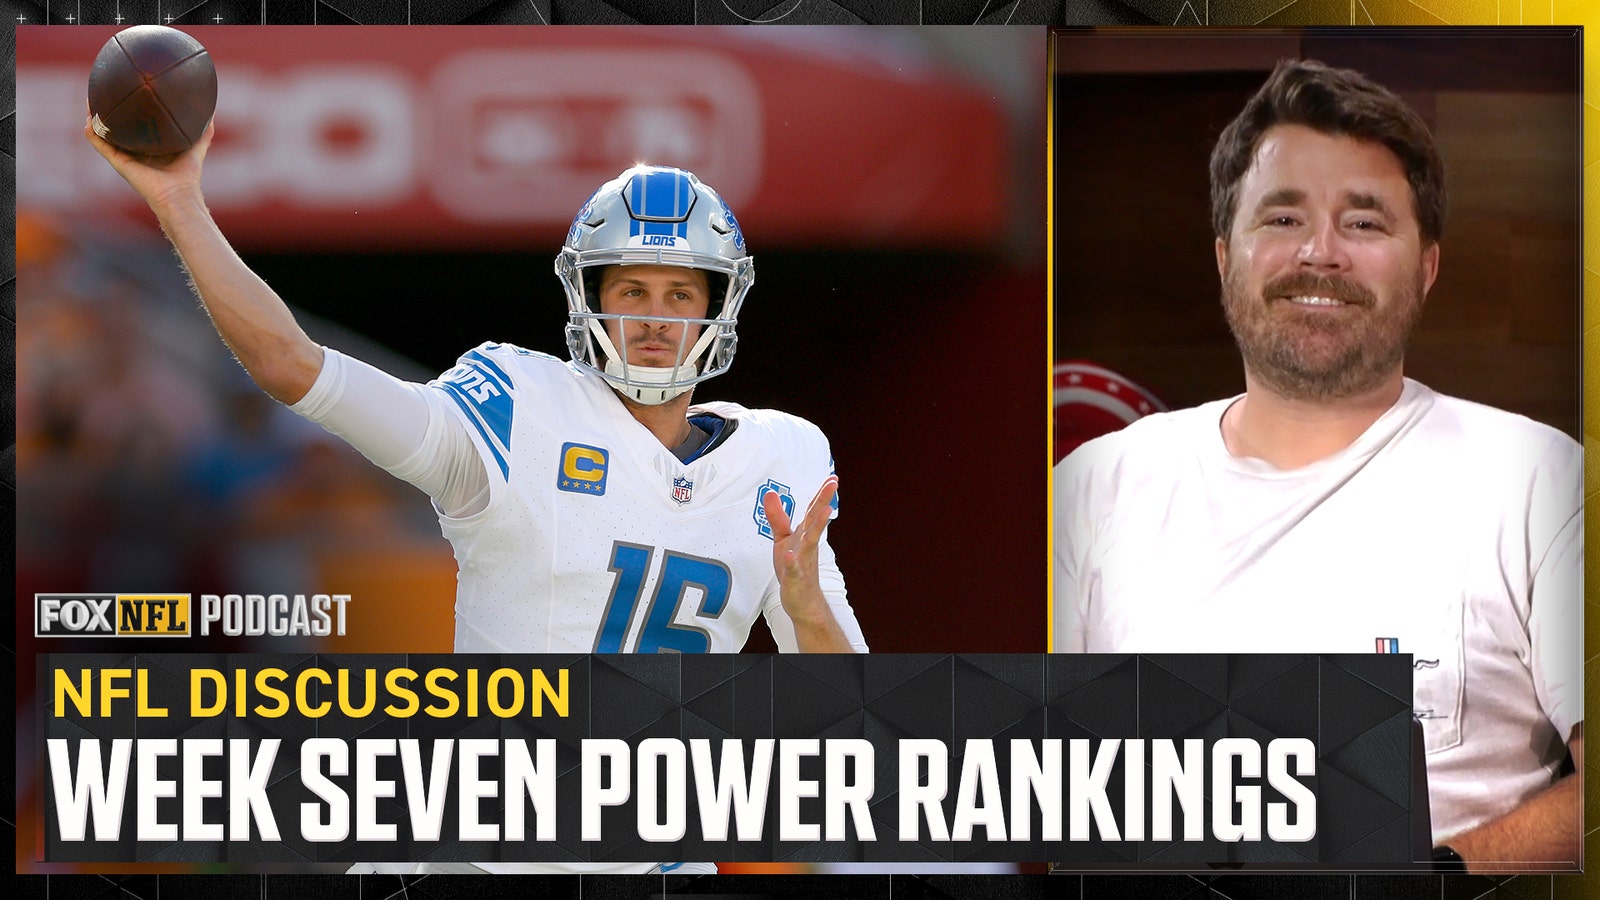 NFL Rankings: Jared Goff leads Lions' rise & Tua Tagovailoa, Dolphins stay on top! 